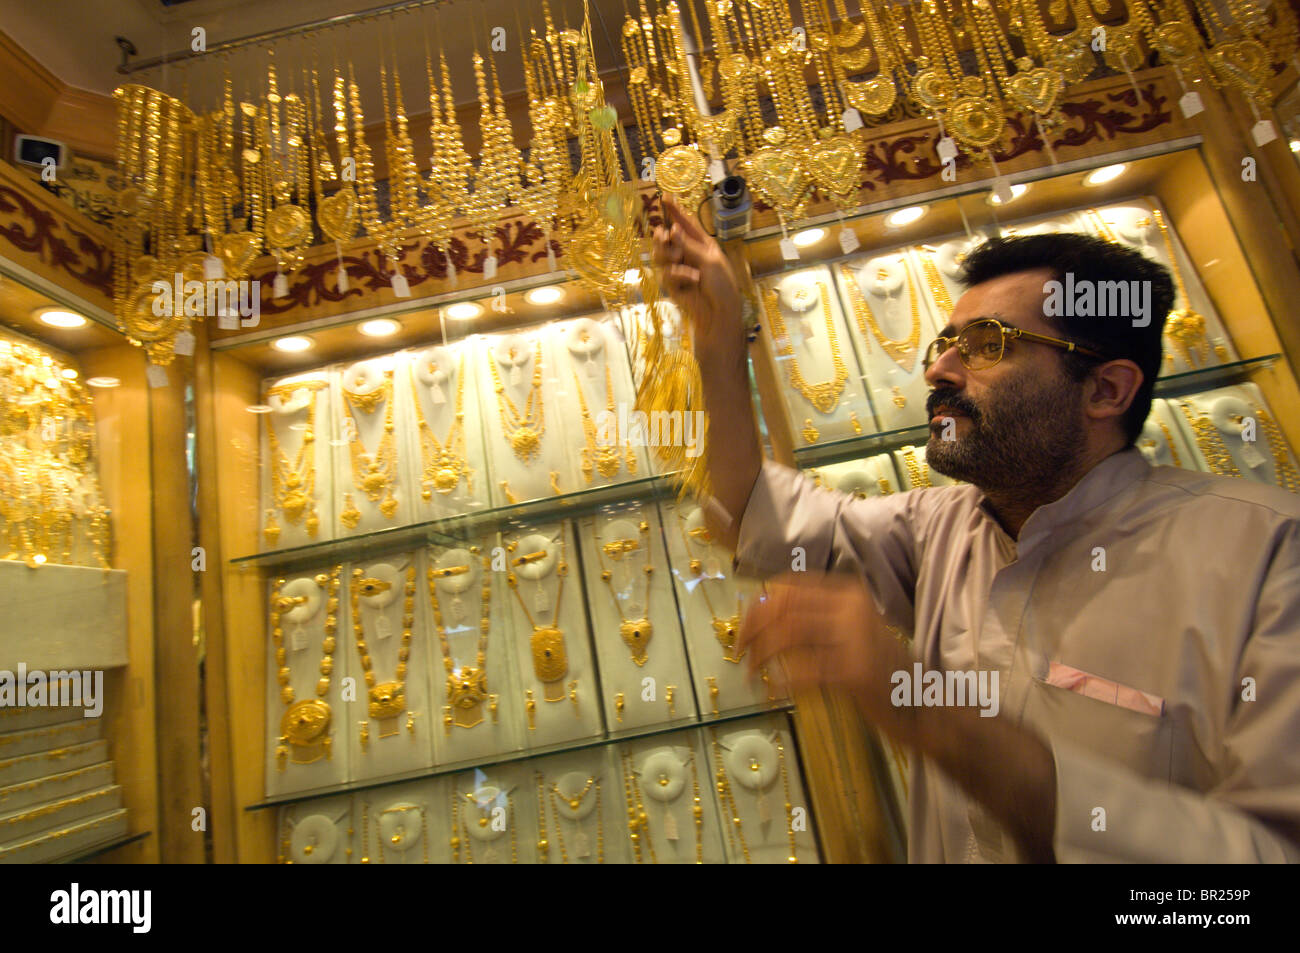 A shop keeper displays elaborate gold jewelry in the famous Gold Souk ...